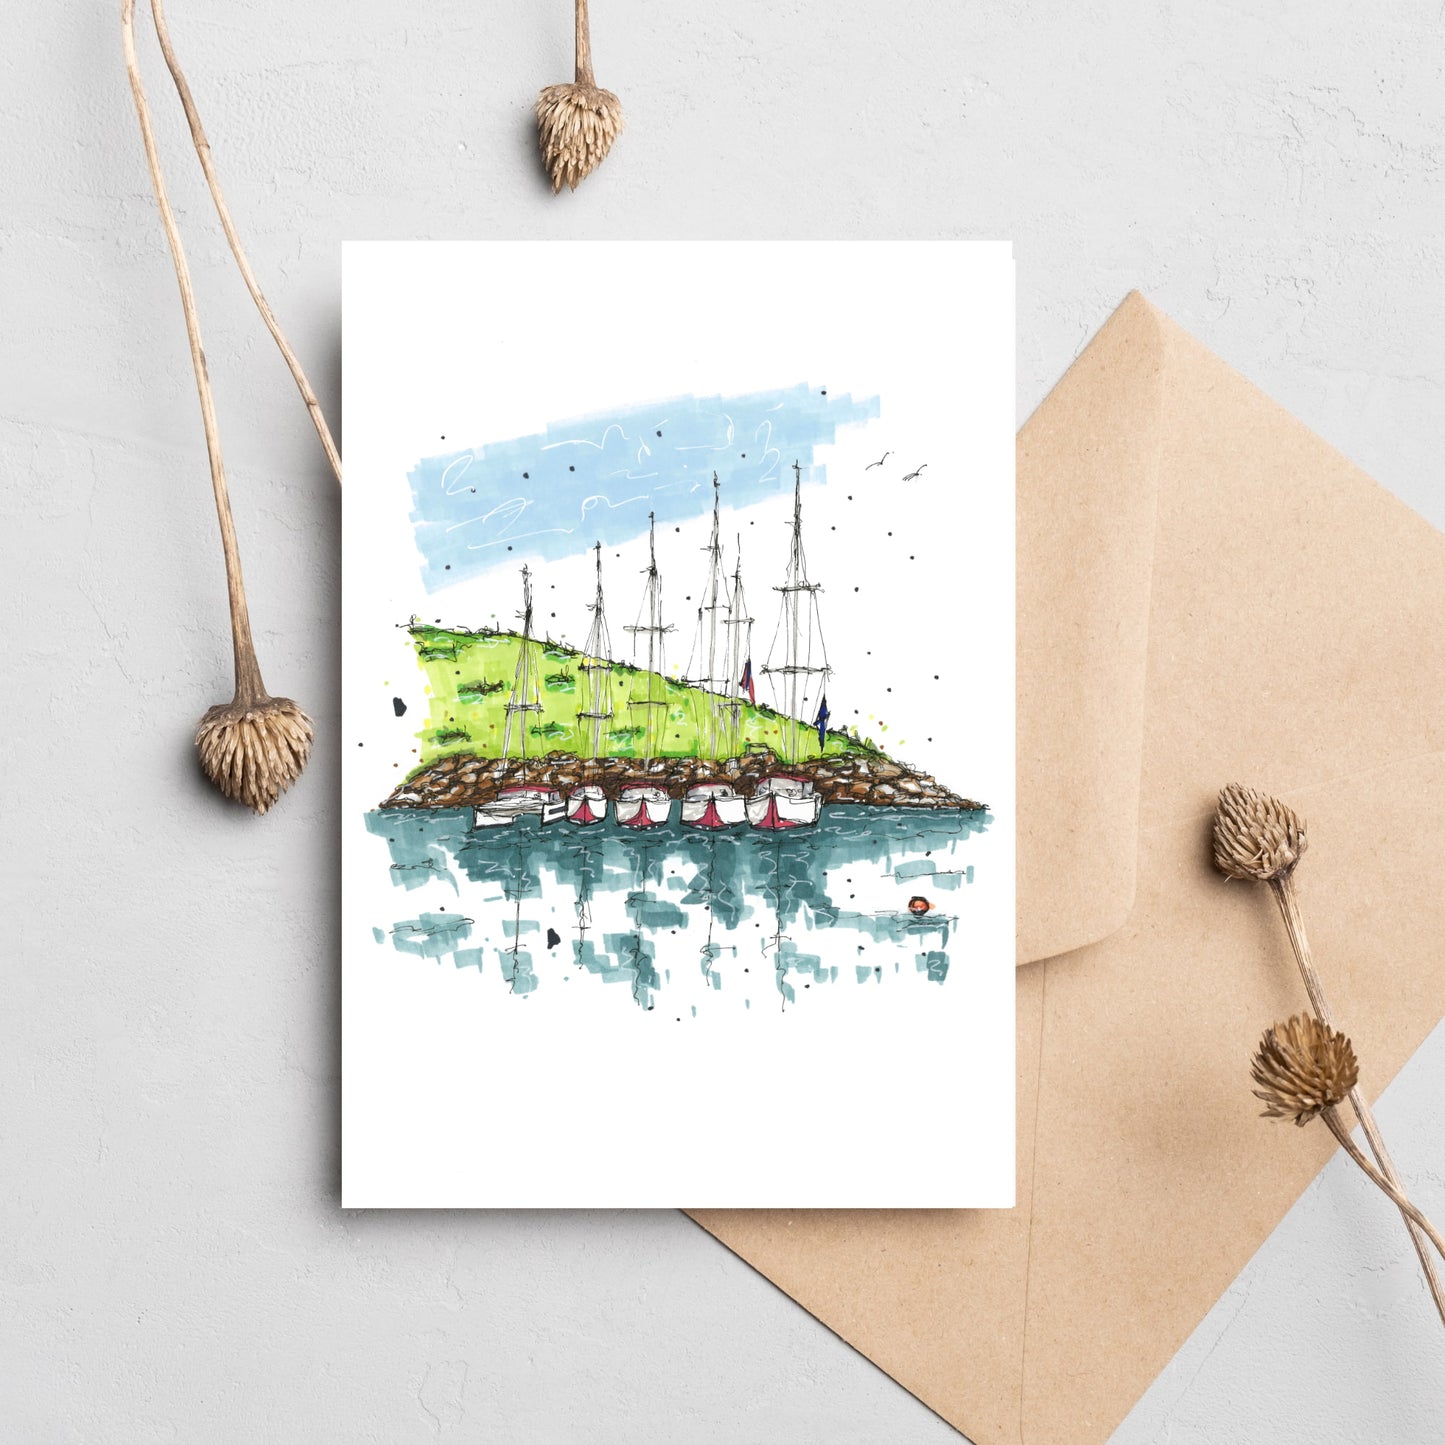 DTS0047 Anchored Sailboats, Greeting Card with Envelope, Downtown Sketcher, Wynand van Niekerk